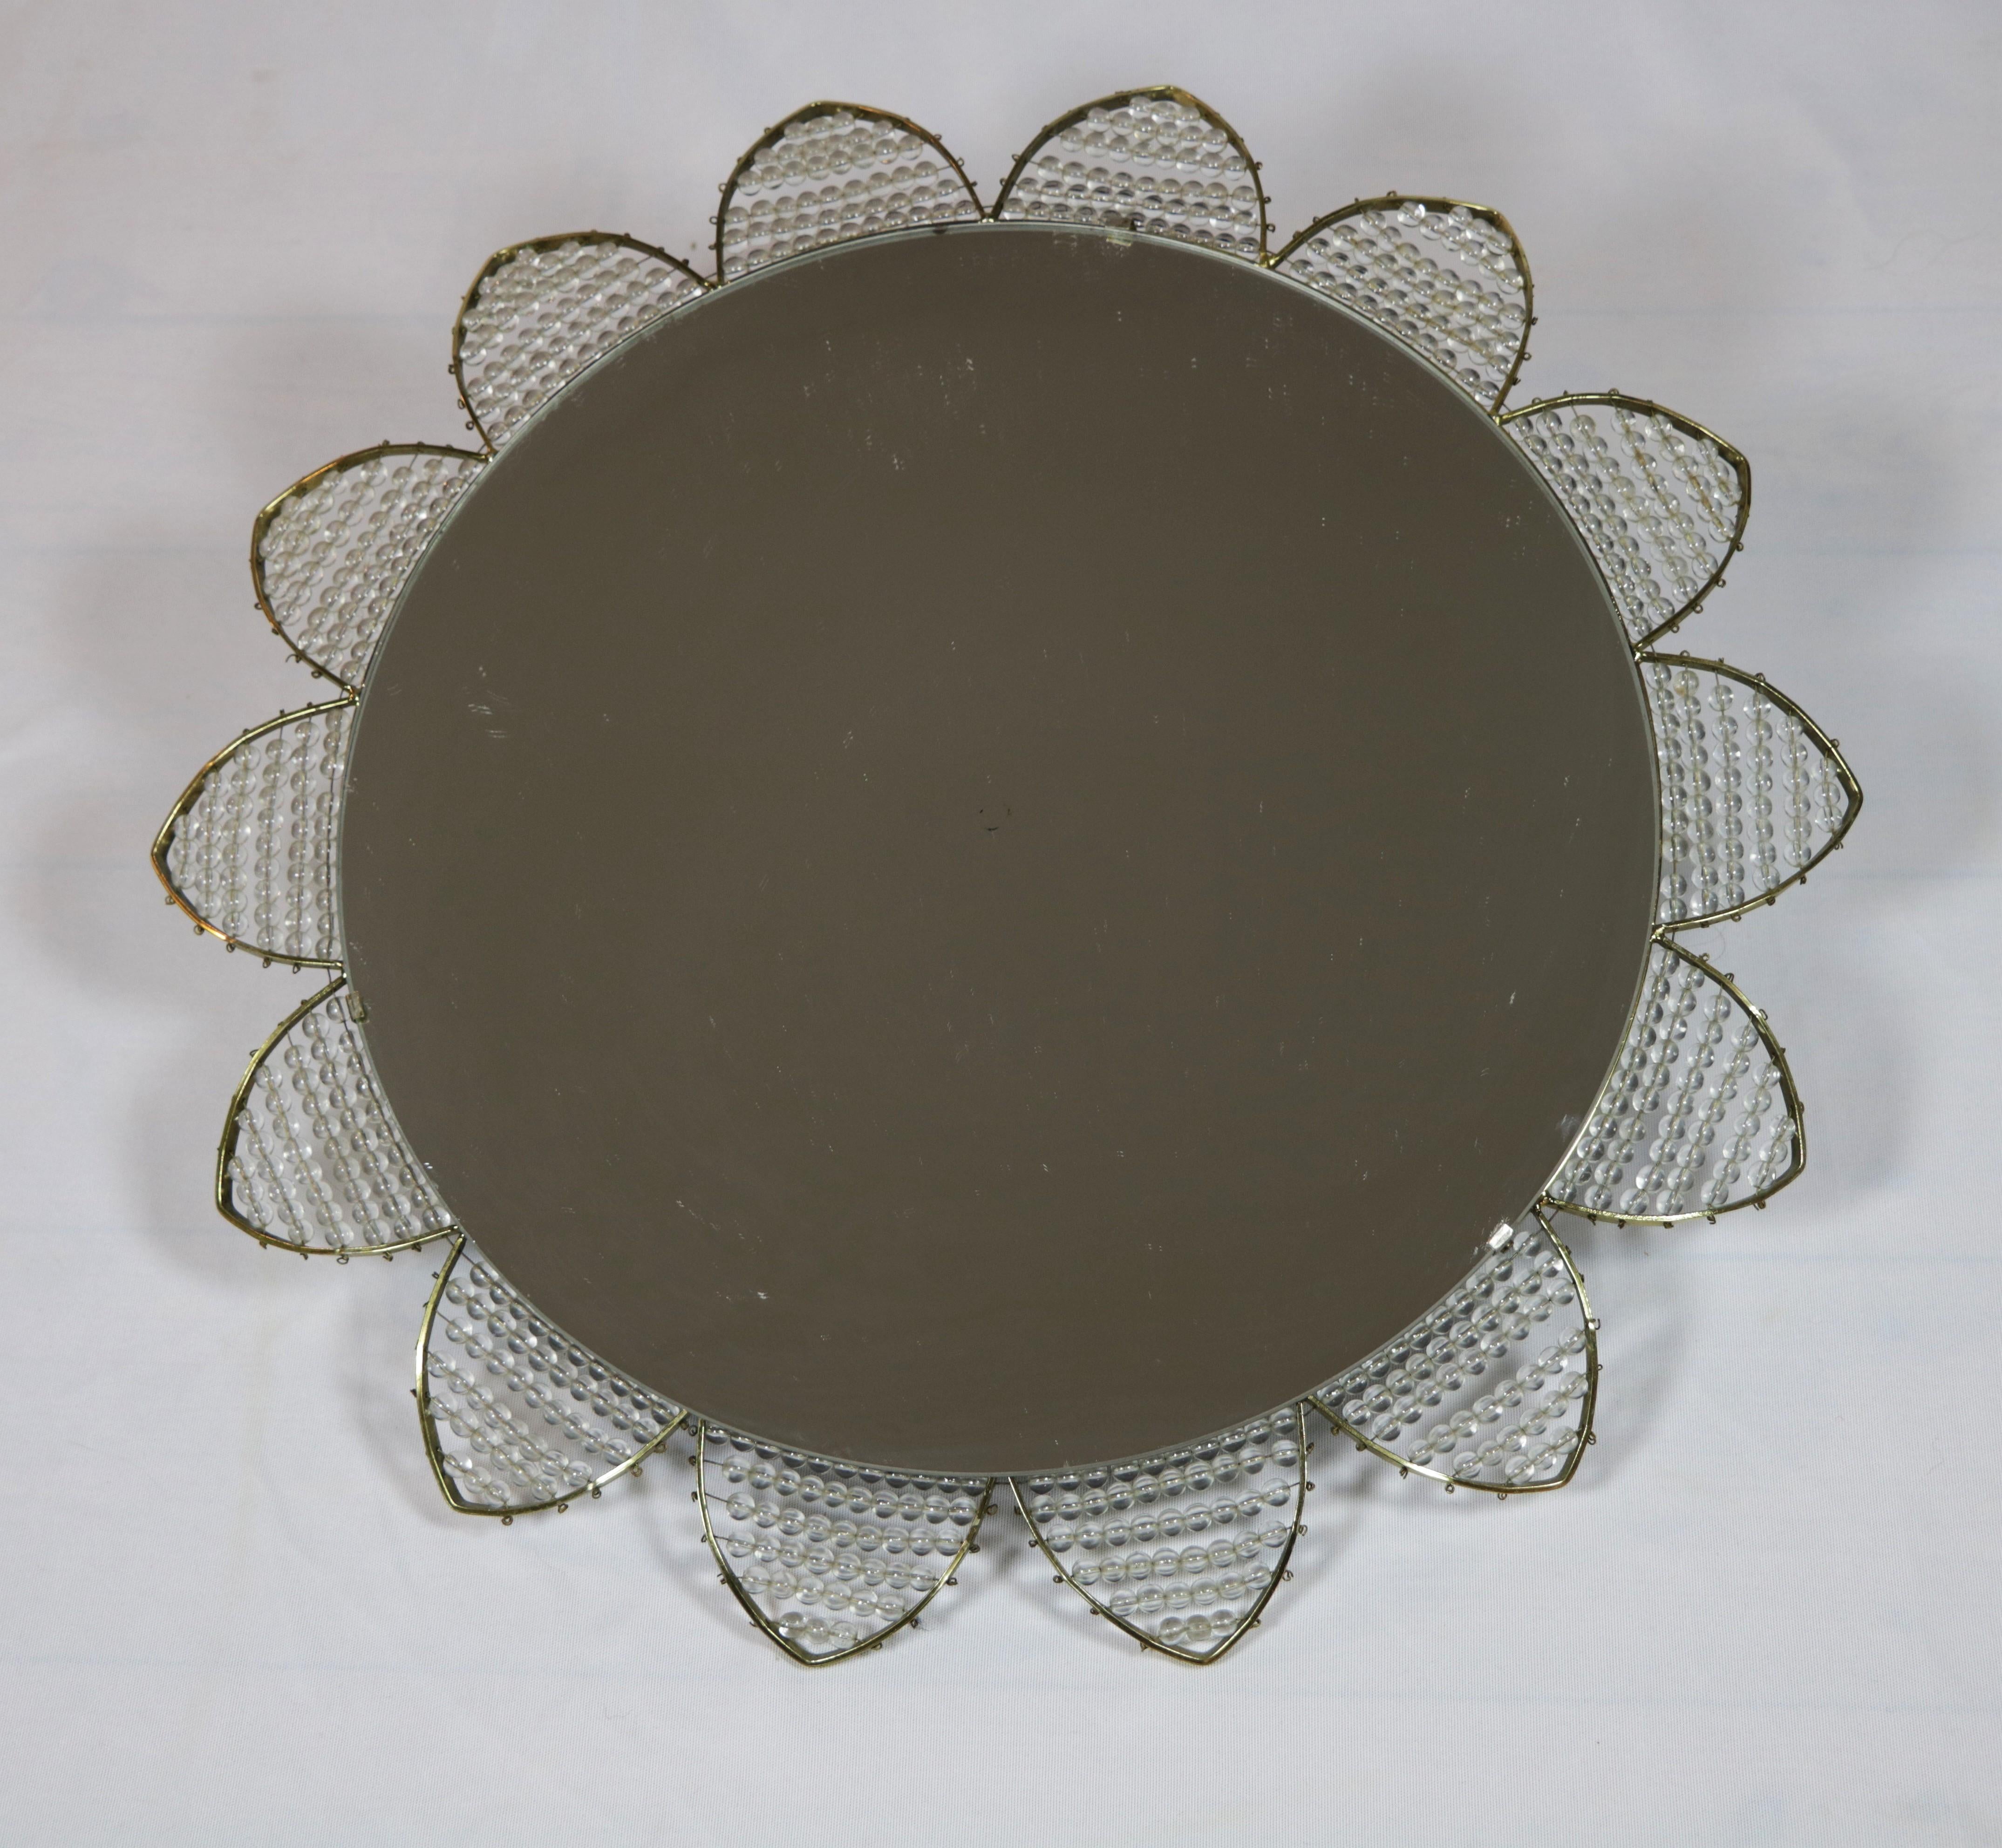 Decorative Illuminated Mirror, Sunburst or Flower Design, Pearls, 1970s In Good Condition For Sale In Berlin, BE